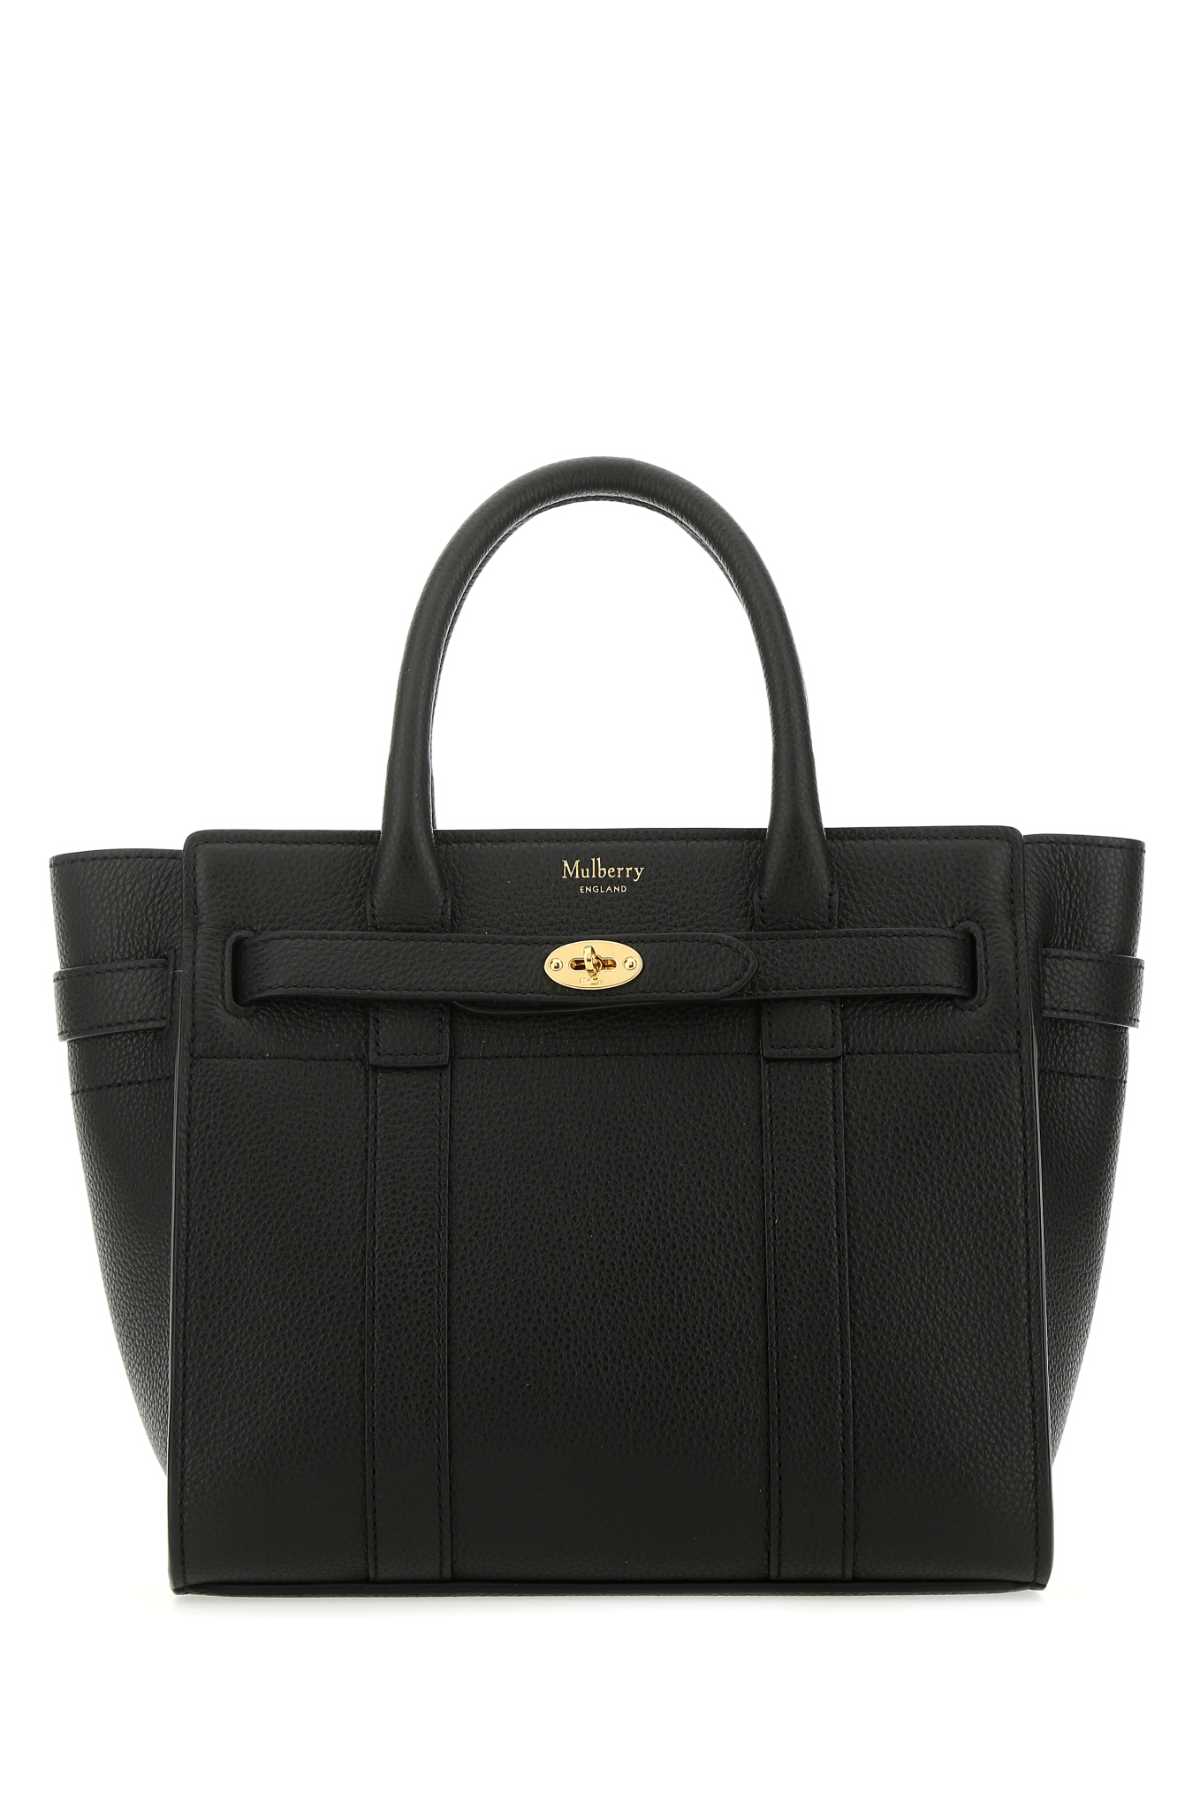 Mulberry Black Leather Mini Bayswater Handbag In A100